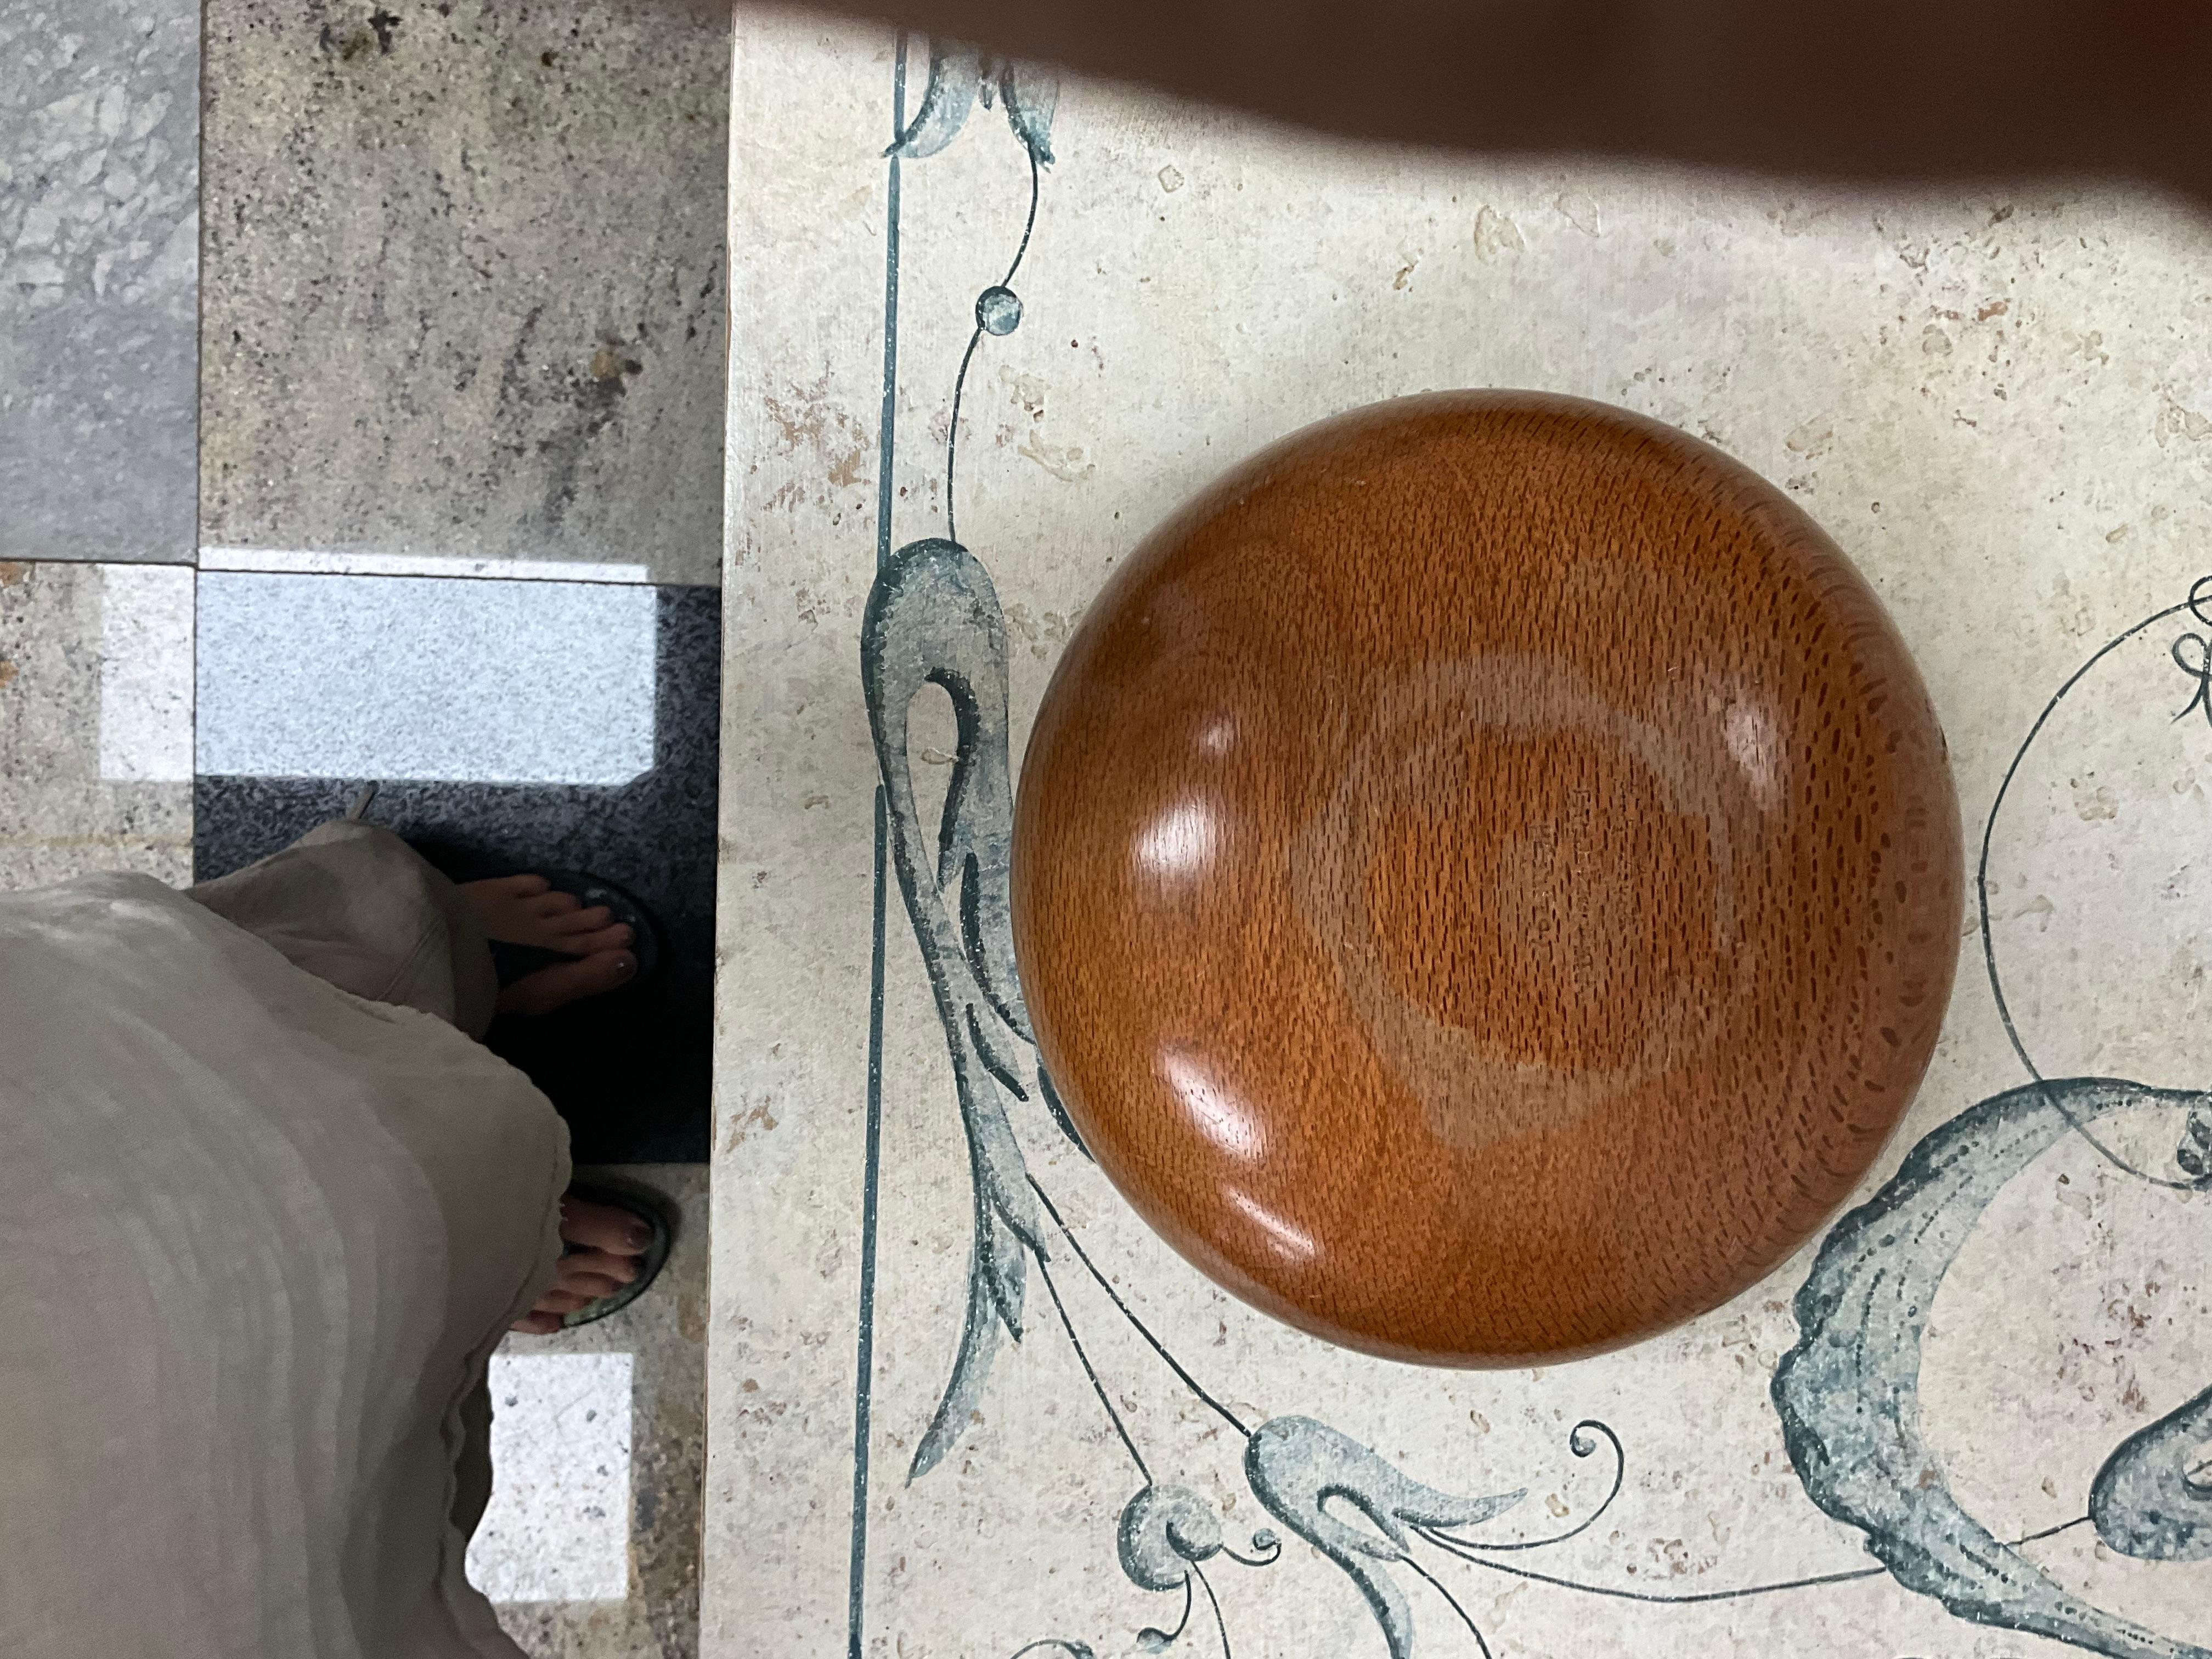 Stylized hand turned studio wood bowl by Peruvian expert wood turner Luis Loyola.  Signed on the underside. Luis Loyola began wood-turning about 20 years or so ago, when working with his father,a cabinet maker, in Lima,Peru. Luis learned the basics